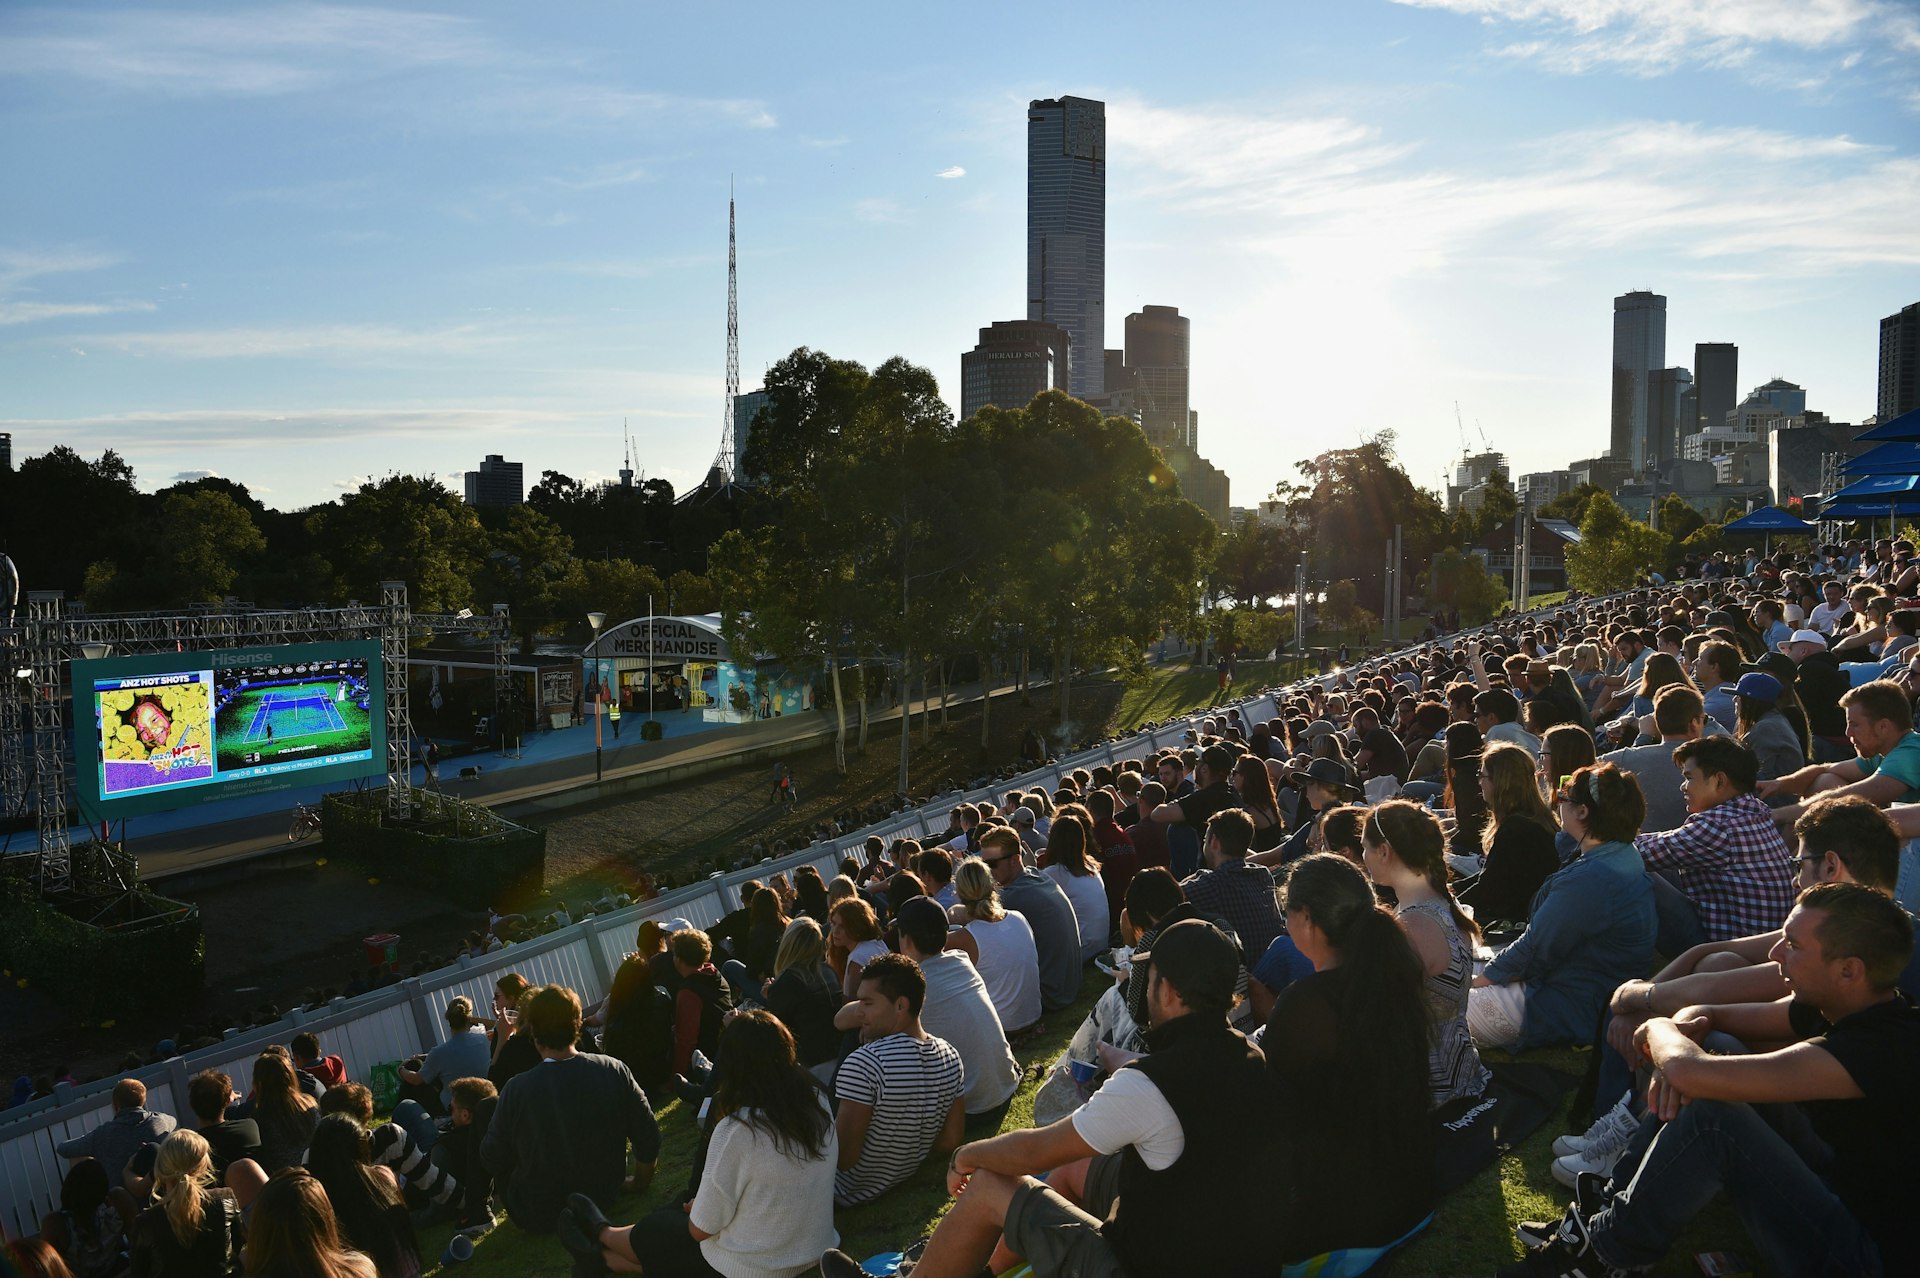 Crowds of people sit on a sloping grassy hill in Birrarung Marr watching the Men's Singles Final match of the Australian Open on a large outdoor screen.